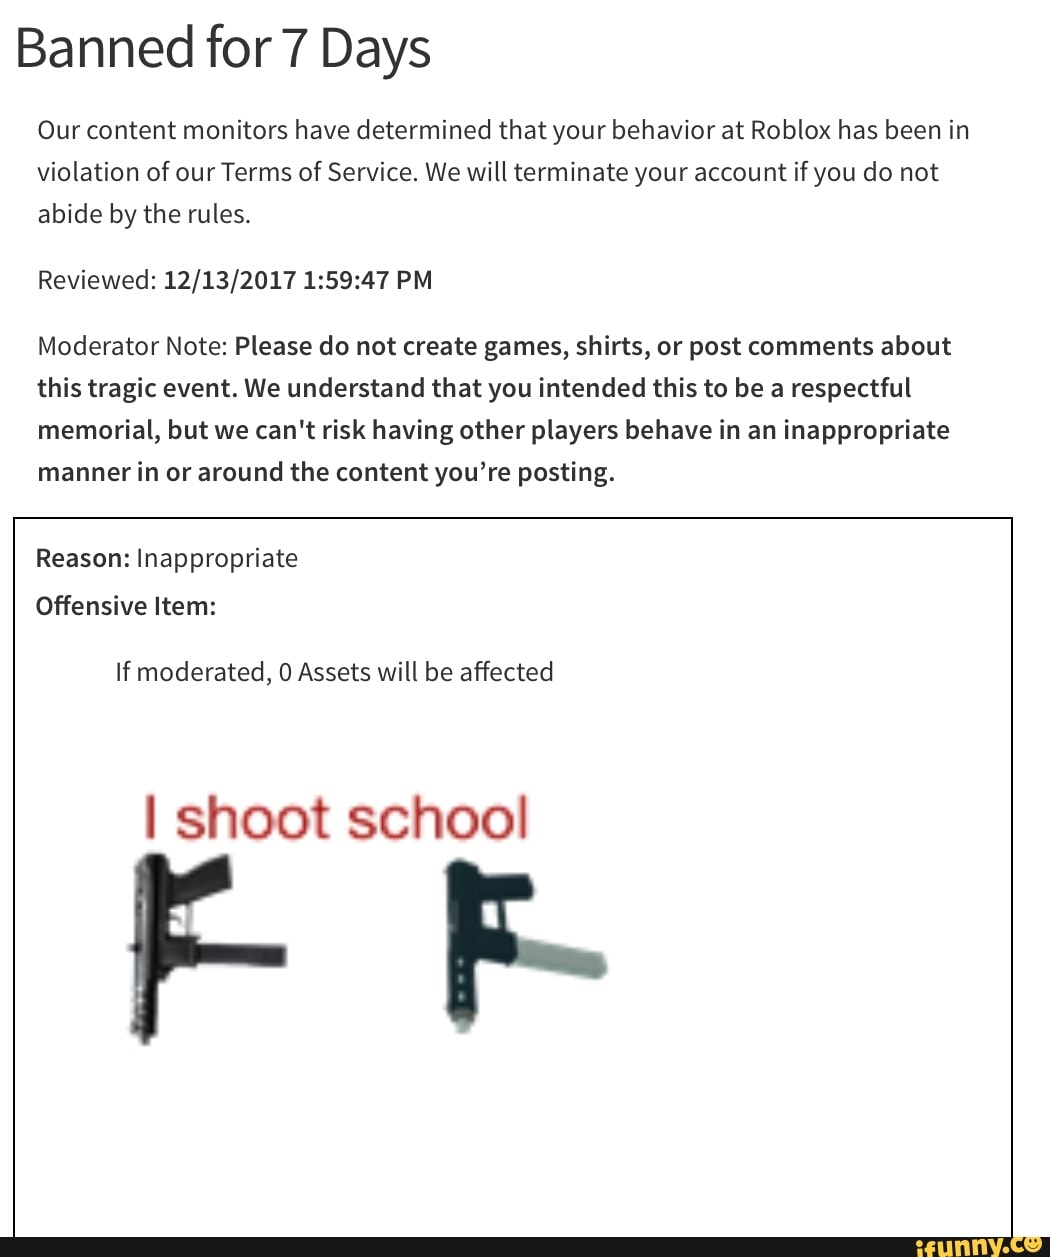 Bannedforydays Our Content Monitors Have Determined That Your Behavior At Roblox Has Been In Violation Of Ourterms Of Service We Will Terminate Your Account If You Do Not Abide By The Rules - how report rule violations roblox